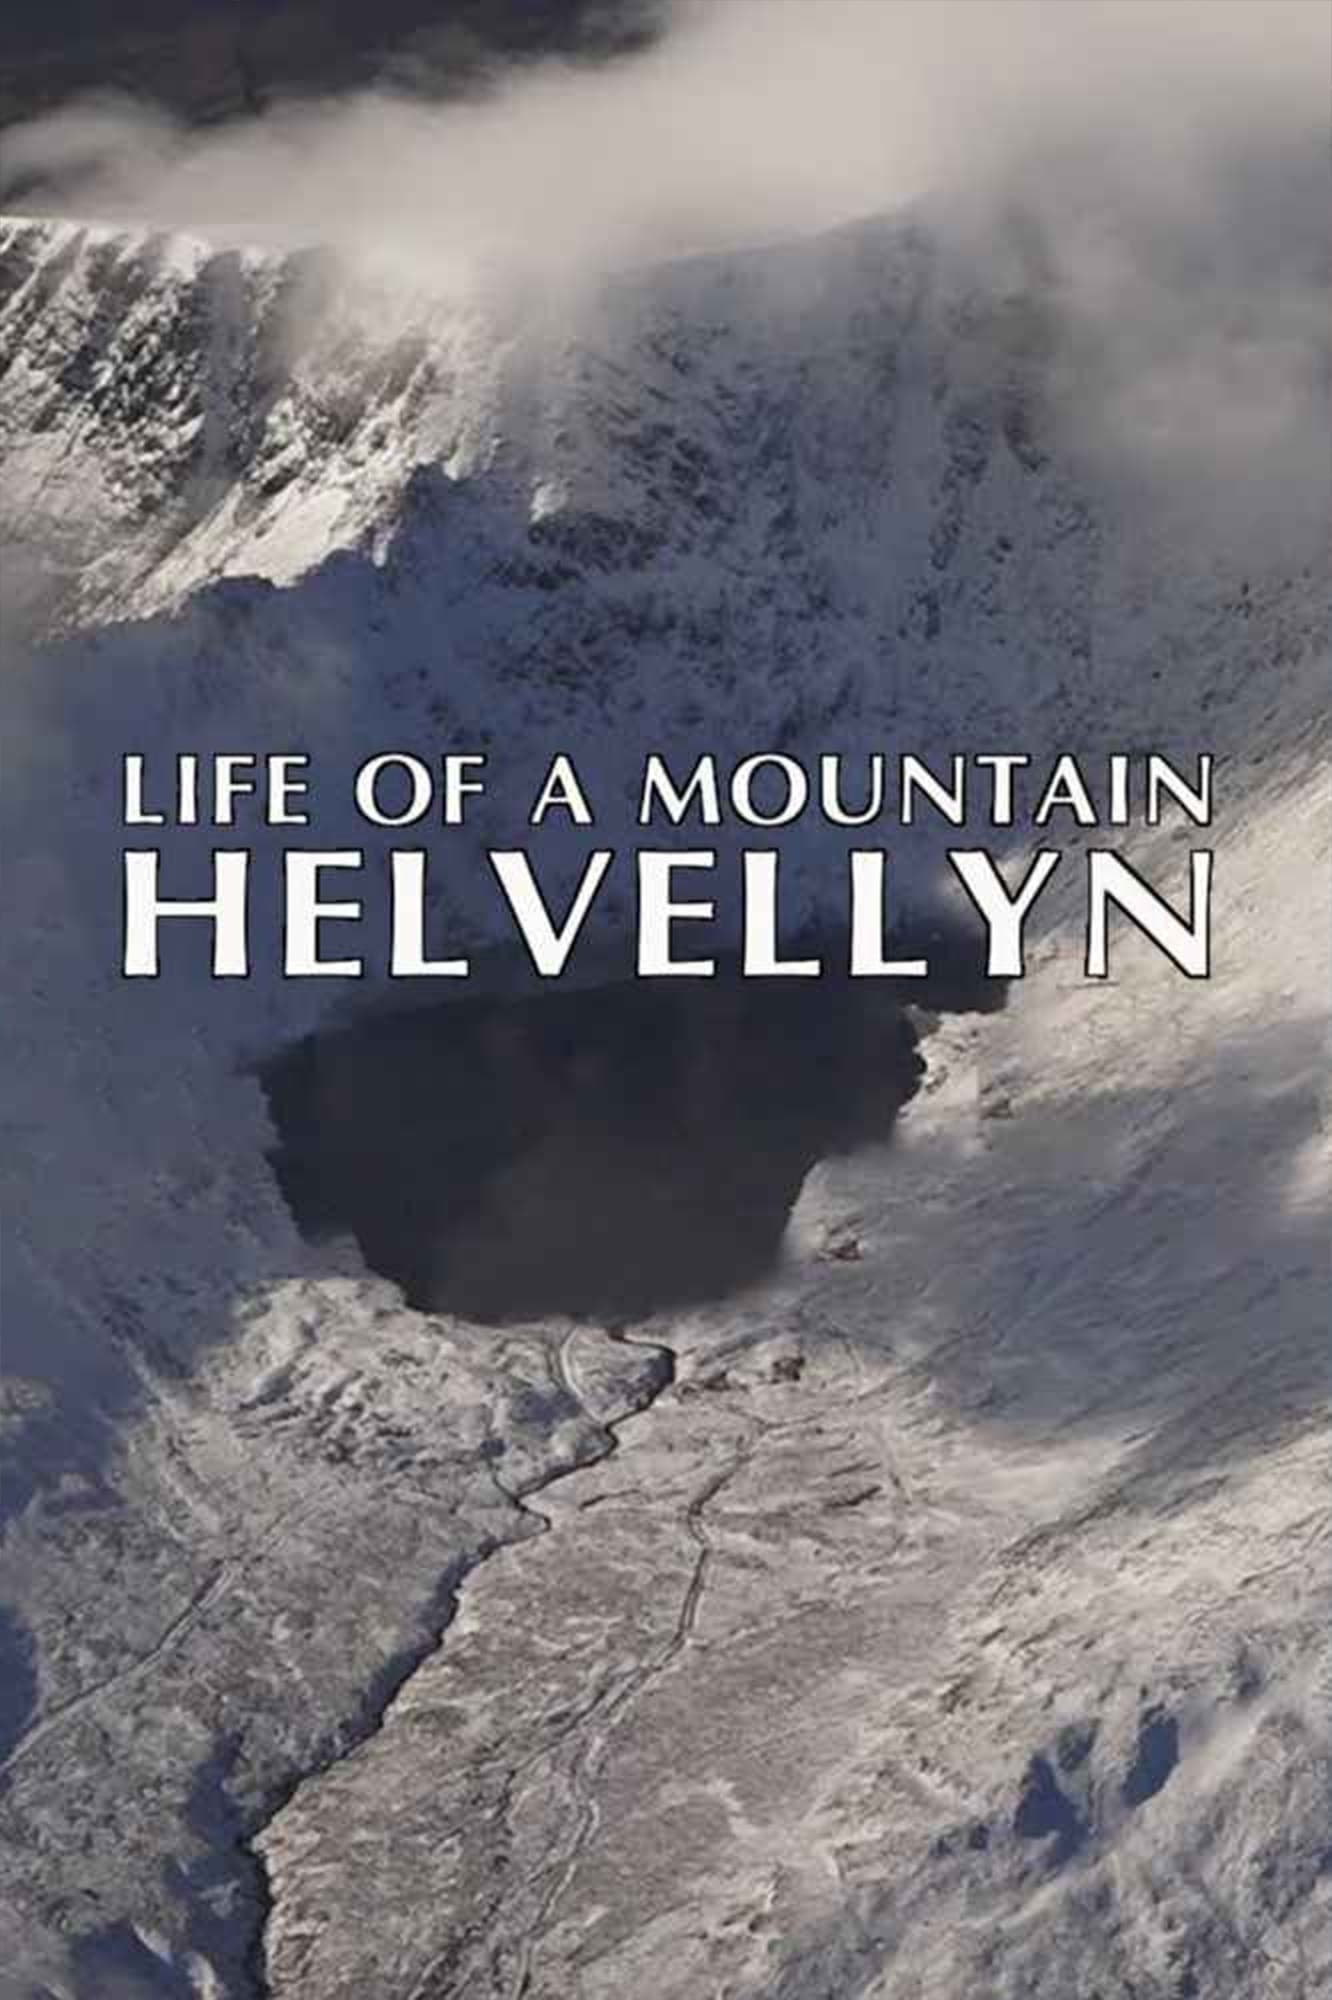 Life of a Mountain: A Year on Helvellyn